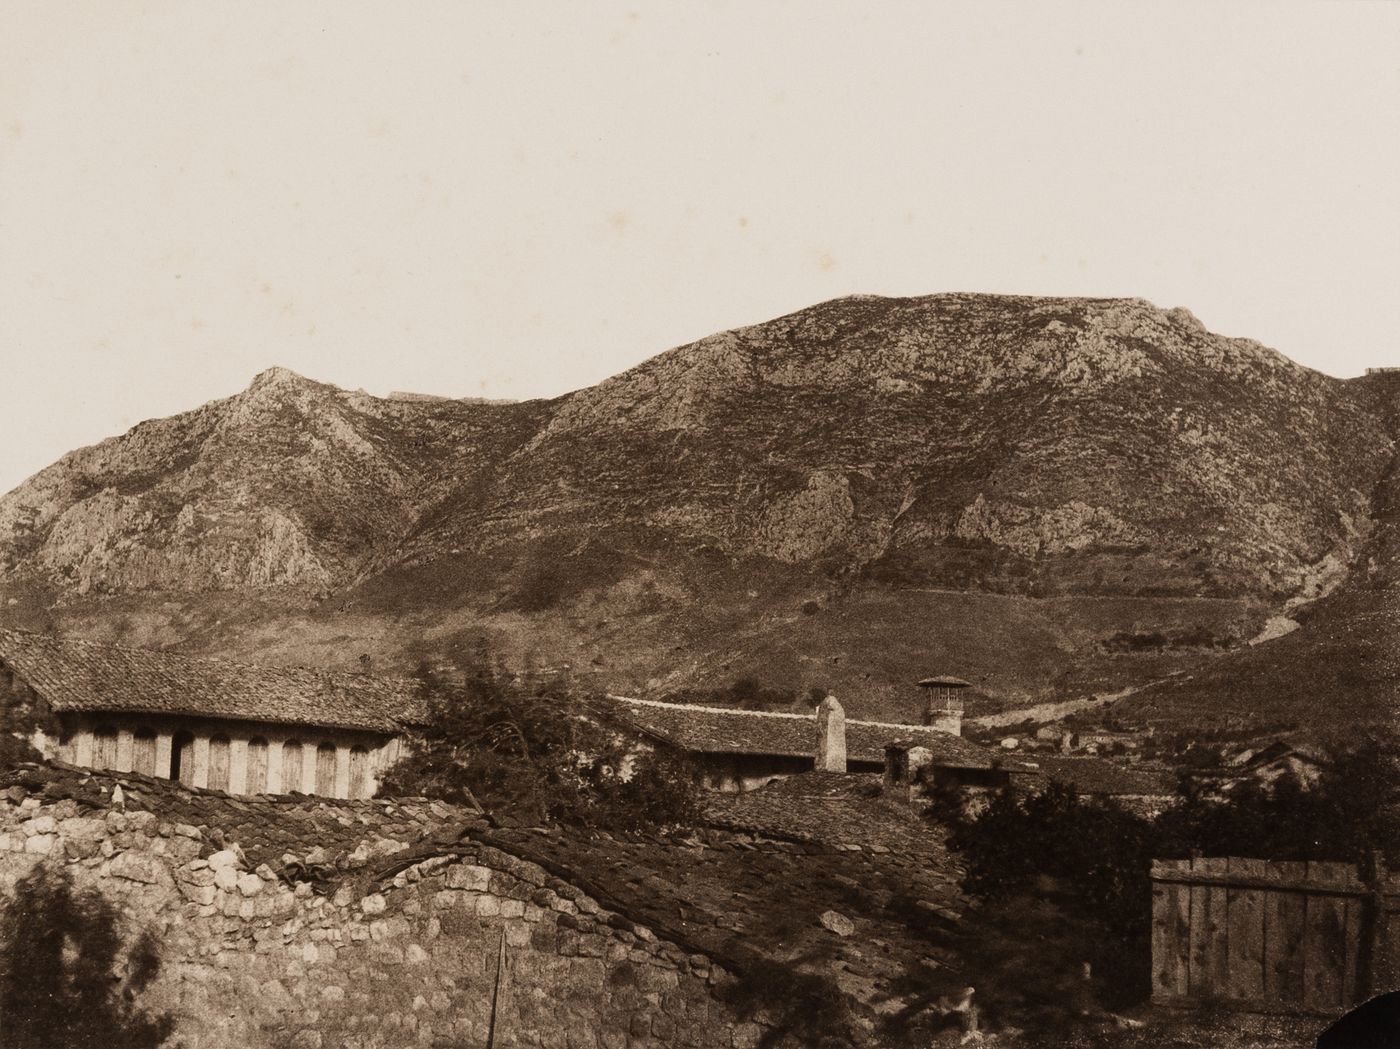 Distant view of the ruins of the fortifications of Antioch with Mount Silpius in the background, Ottoman Empire (now in Antakya, Turkey)